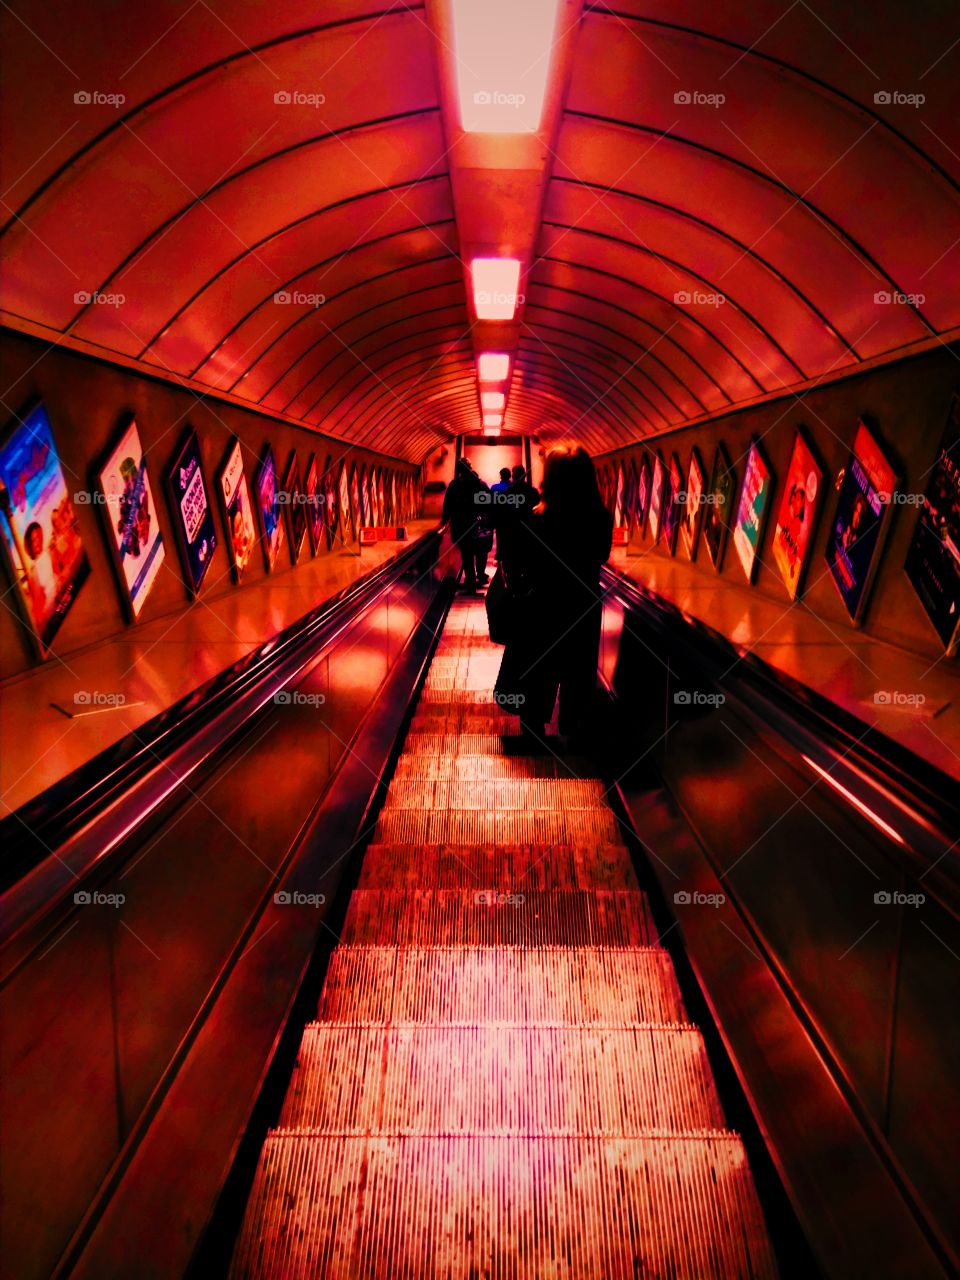 The London Underground, Depth and Saturation